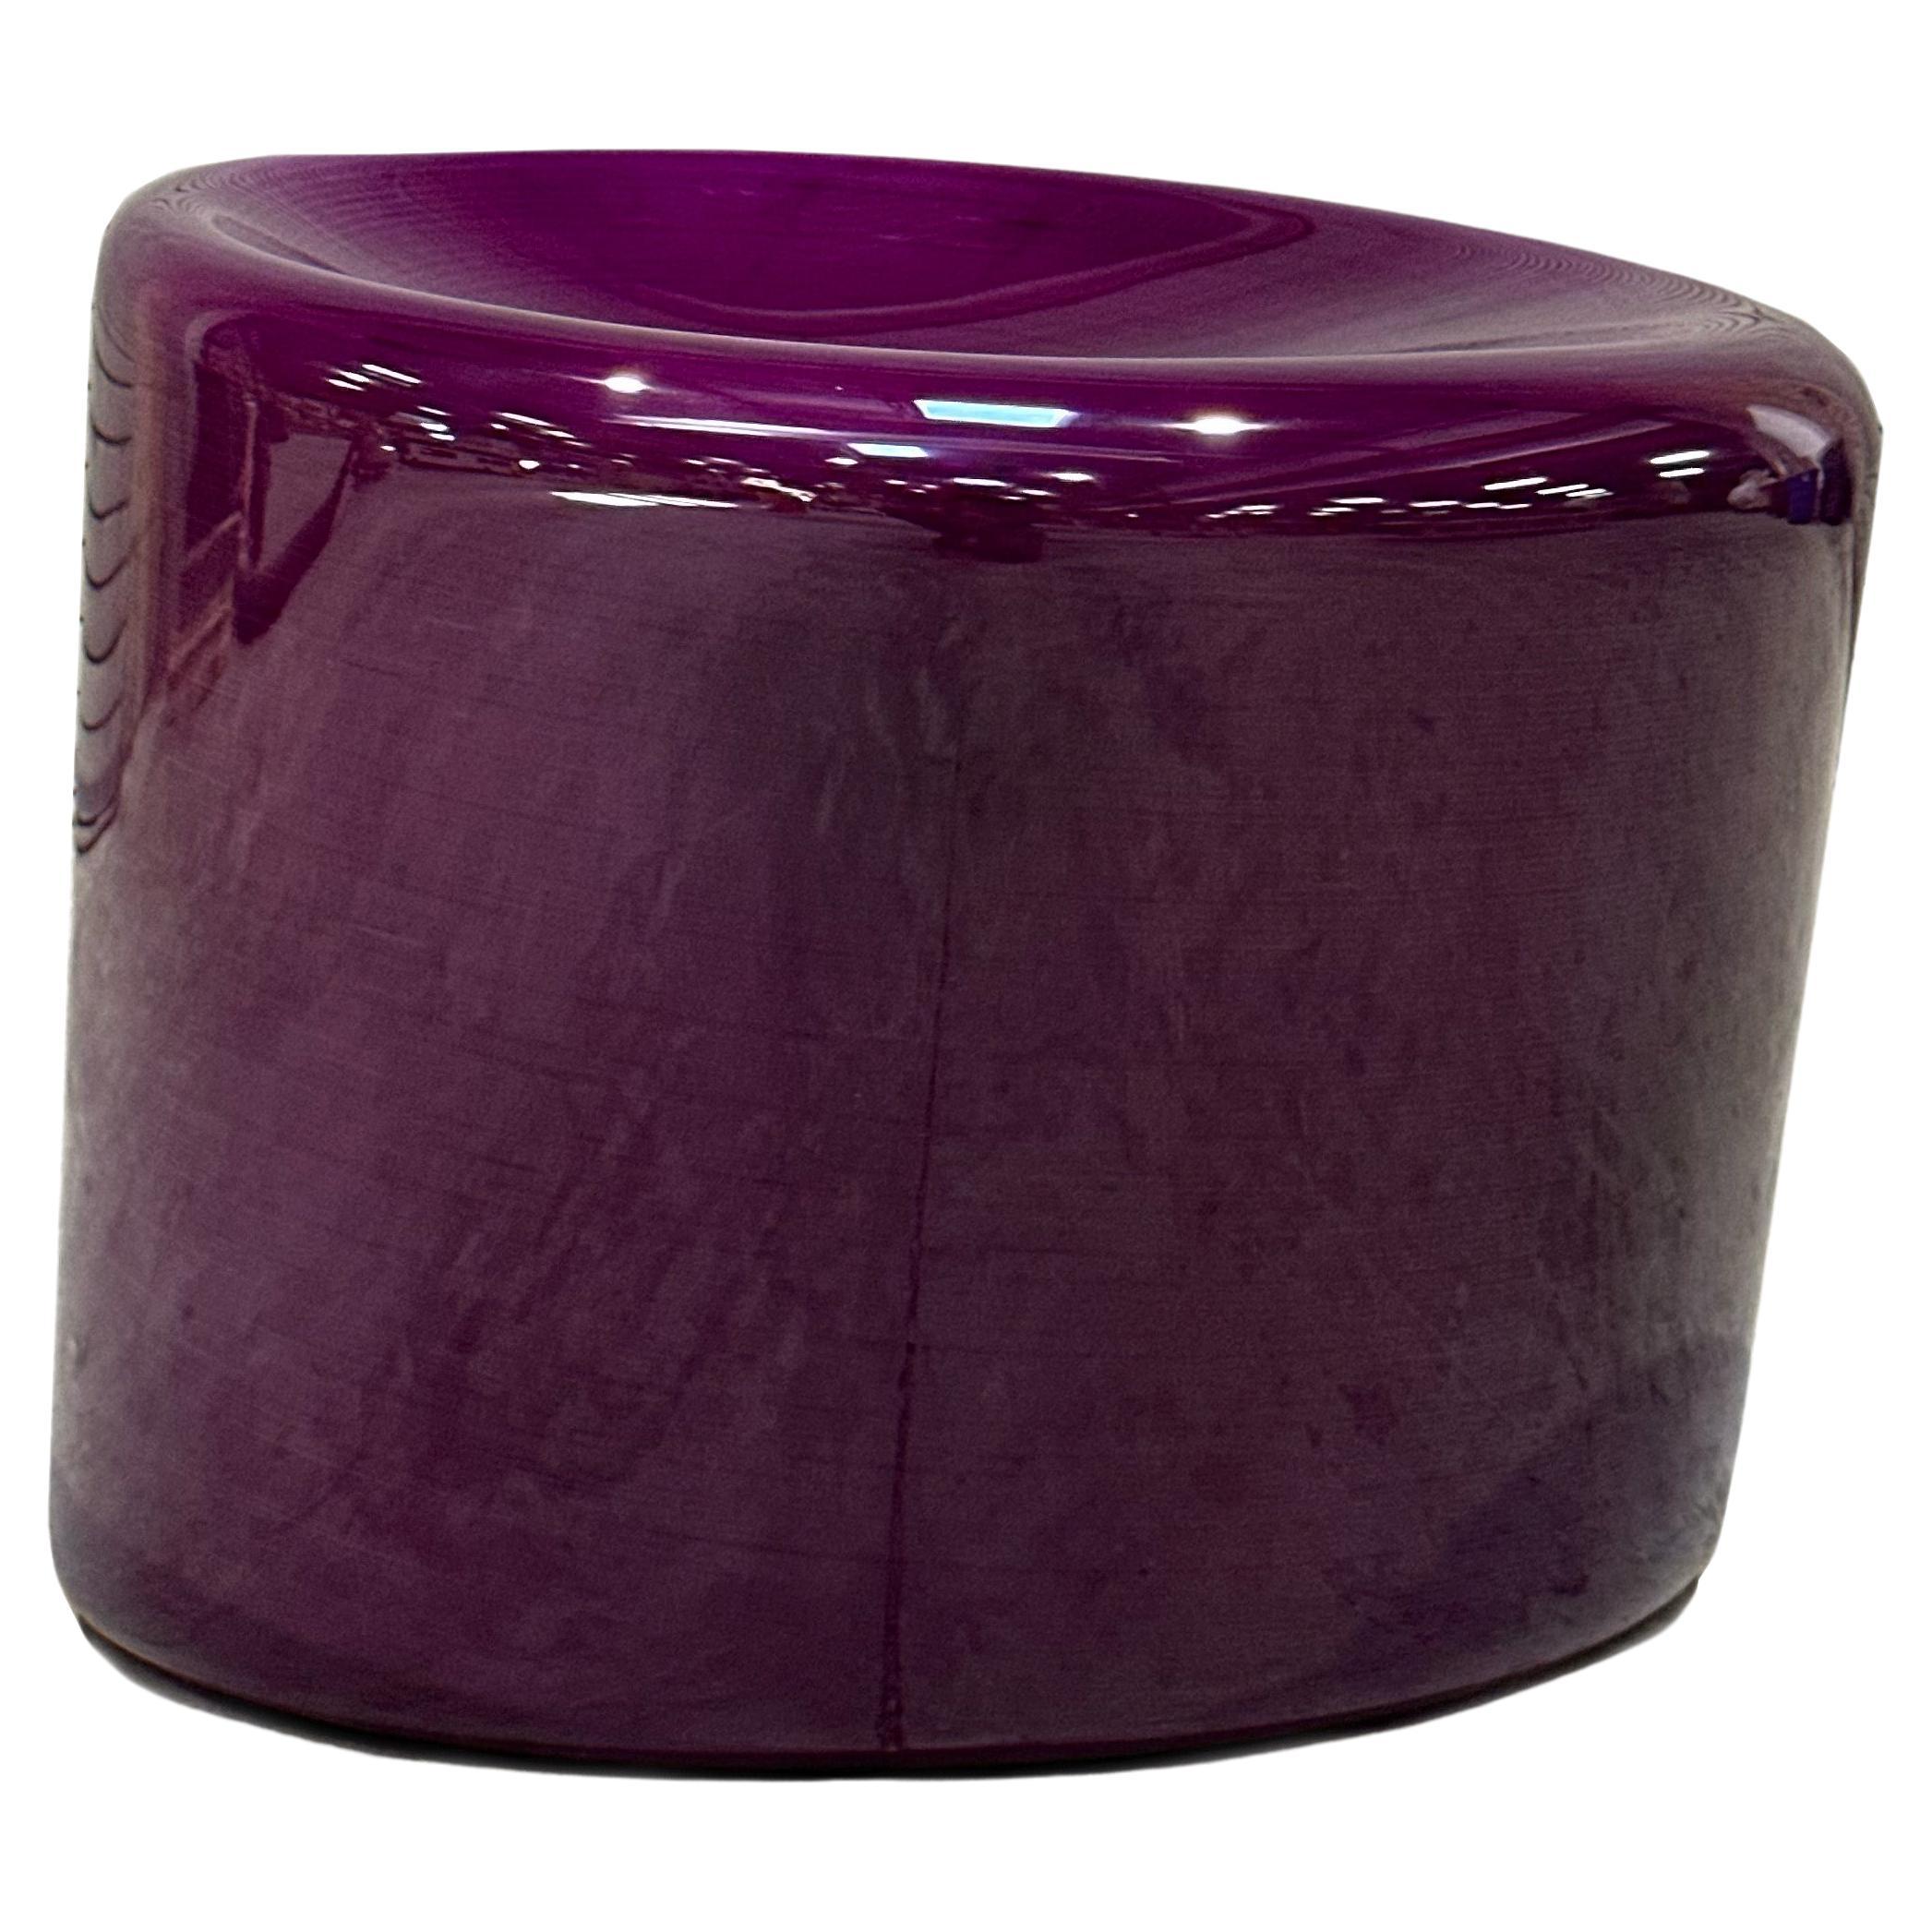 Stack Seat in Purple by Timbur REP by Tuleste Factory